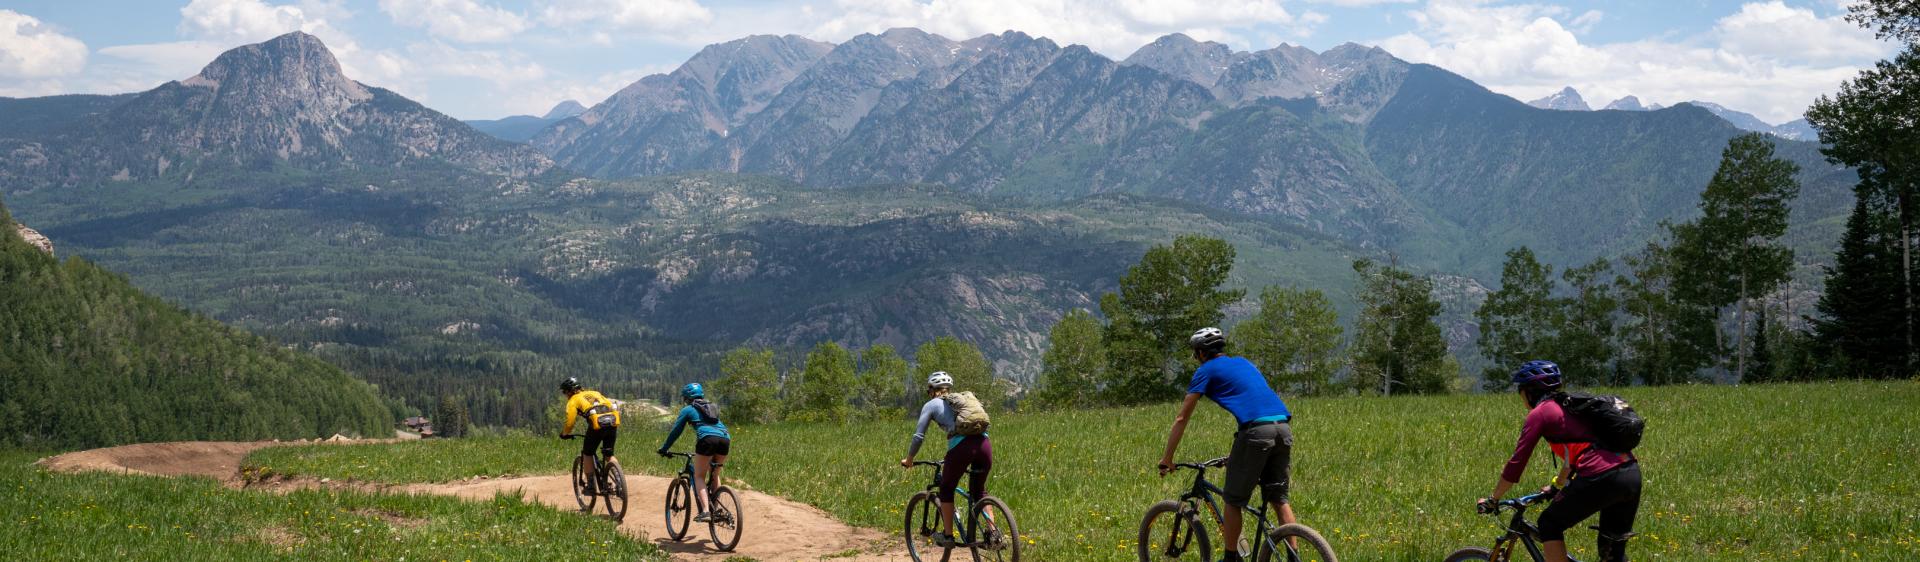 8 Colorado Adventures You Can't Miss This Summer